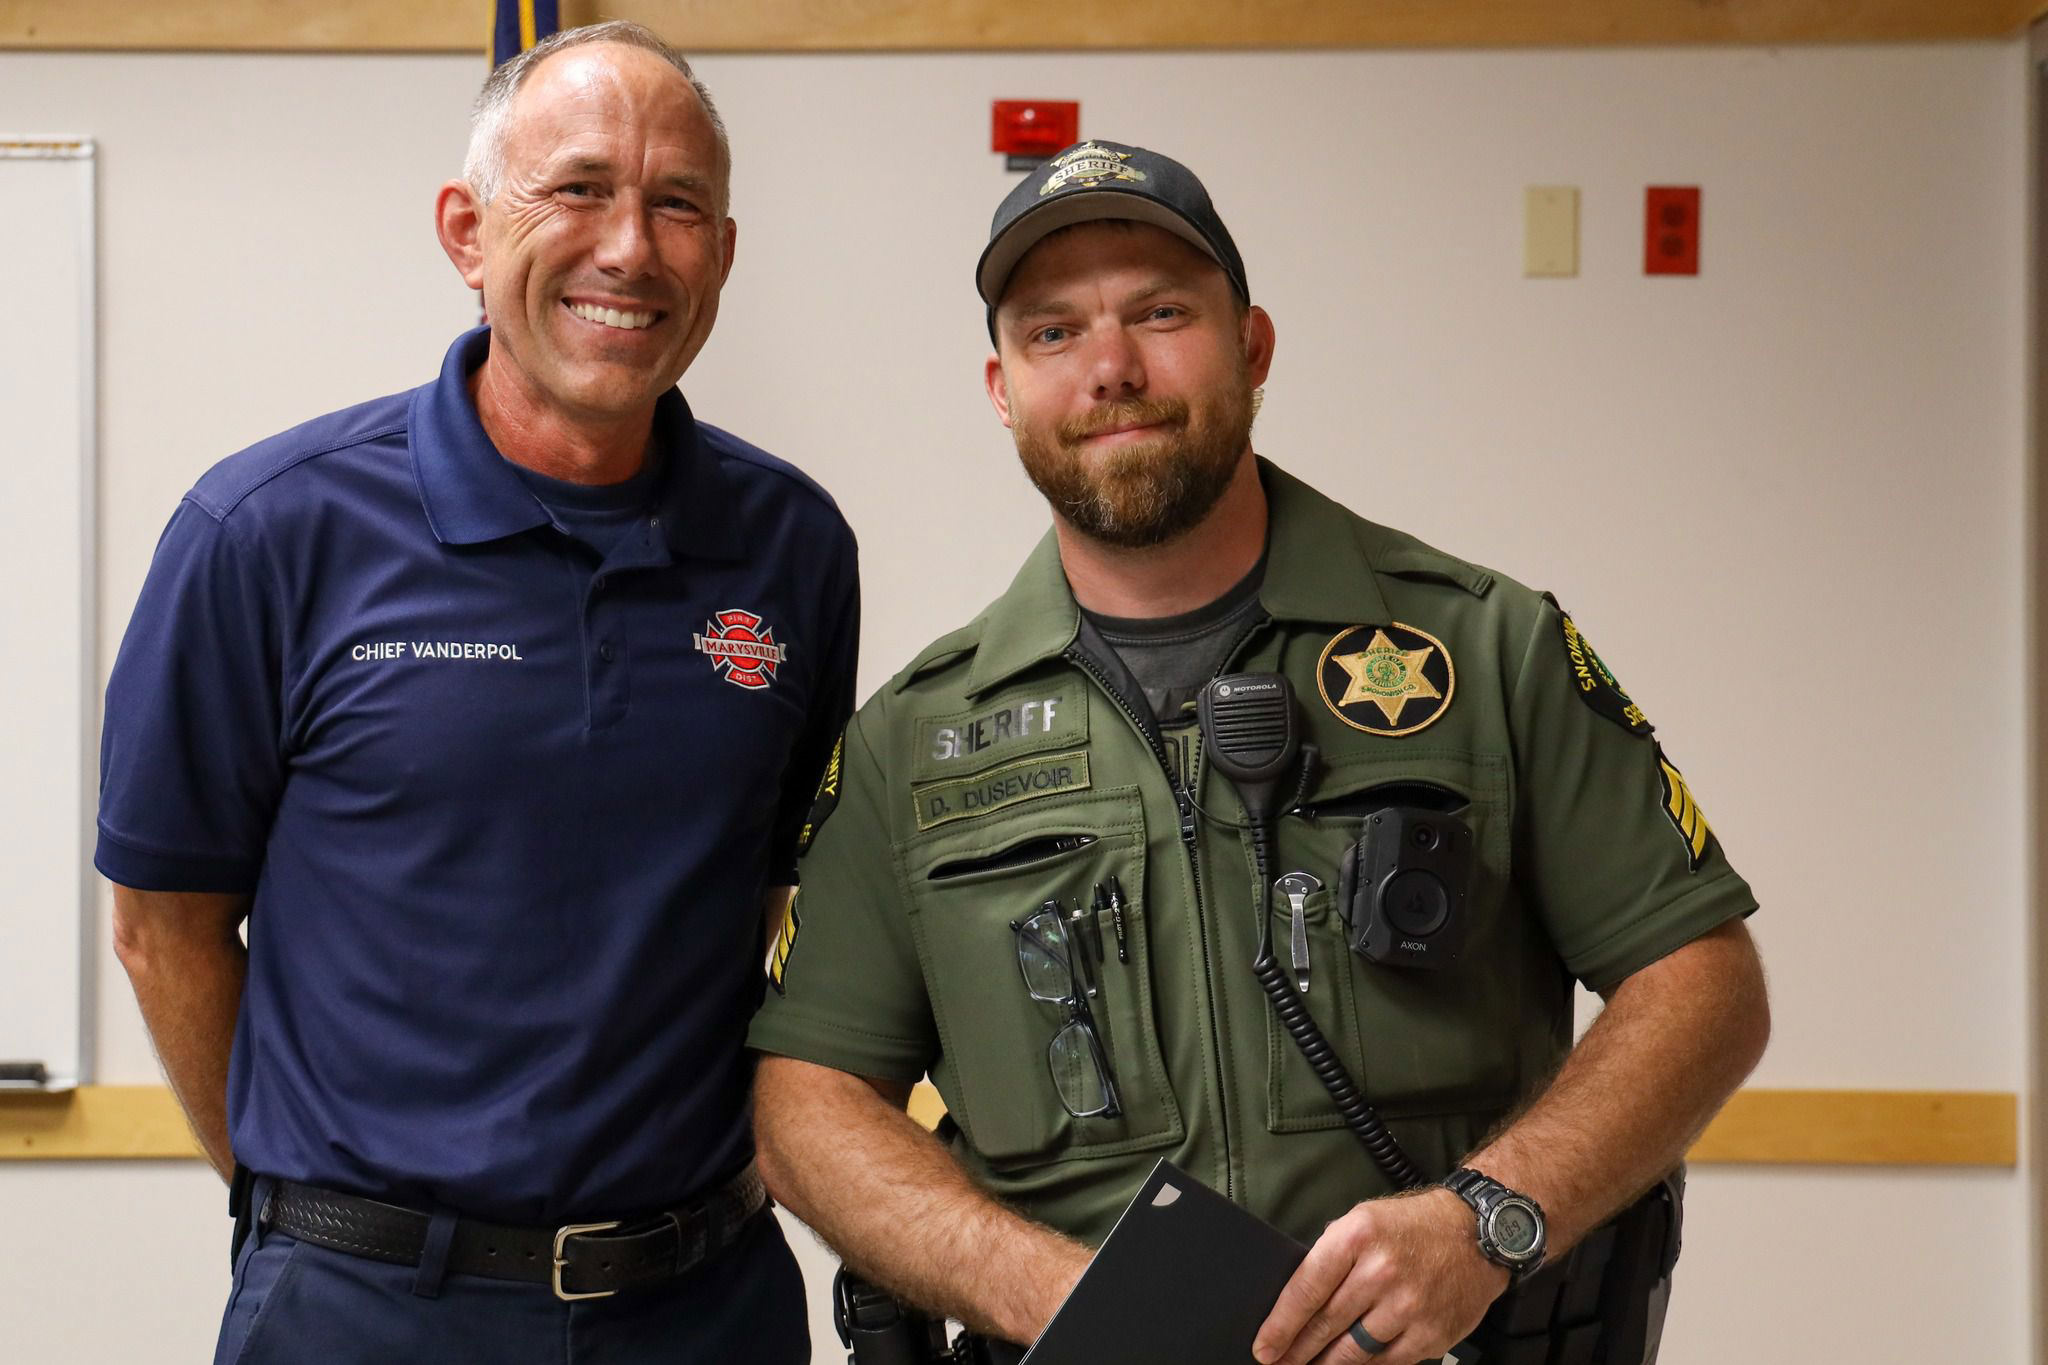 Snohomish County Sheriff’s Sergeant recognized for saving 2 people from